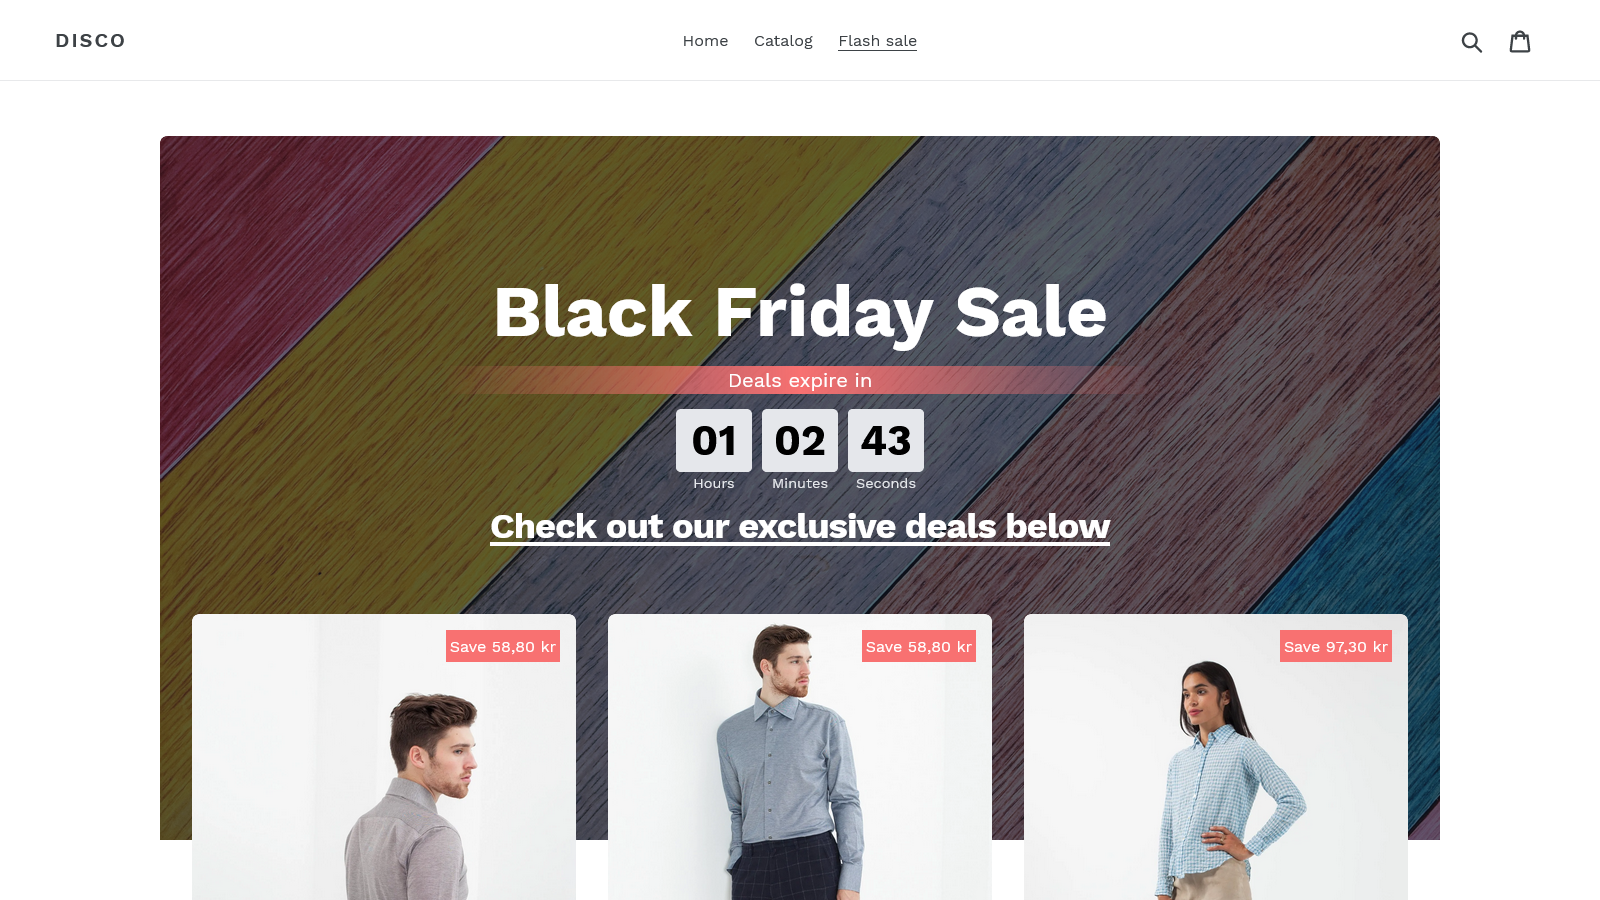 Create flash sale landing pages for browsing the products.